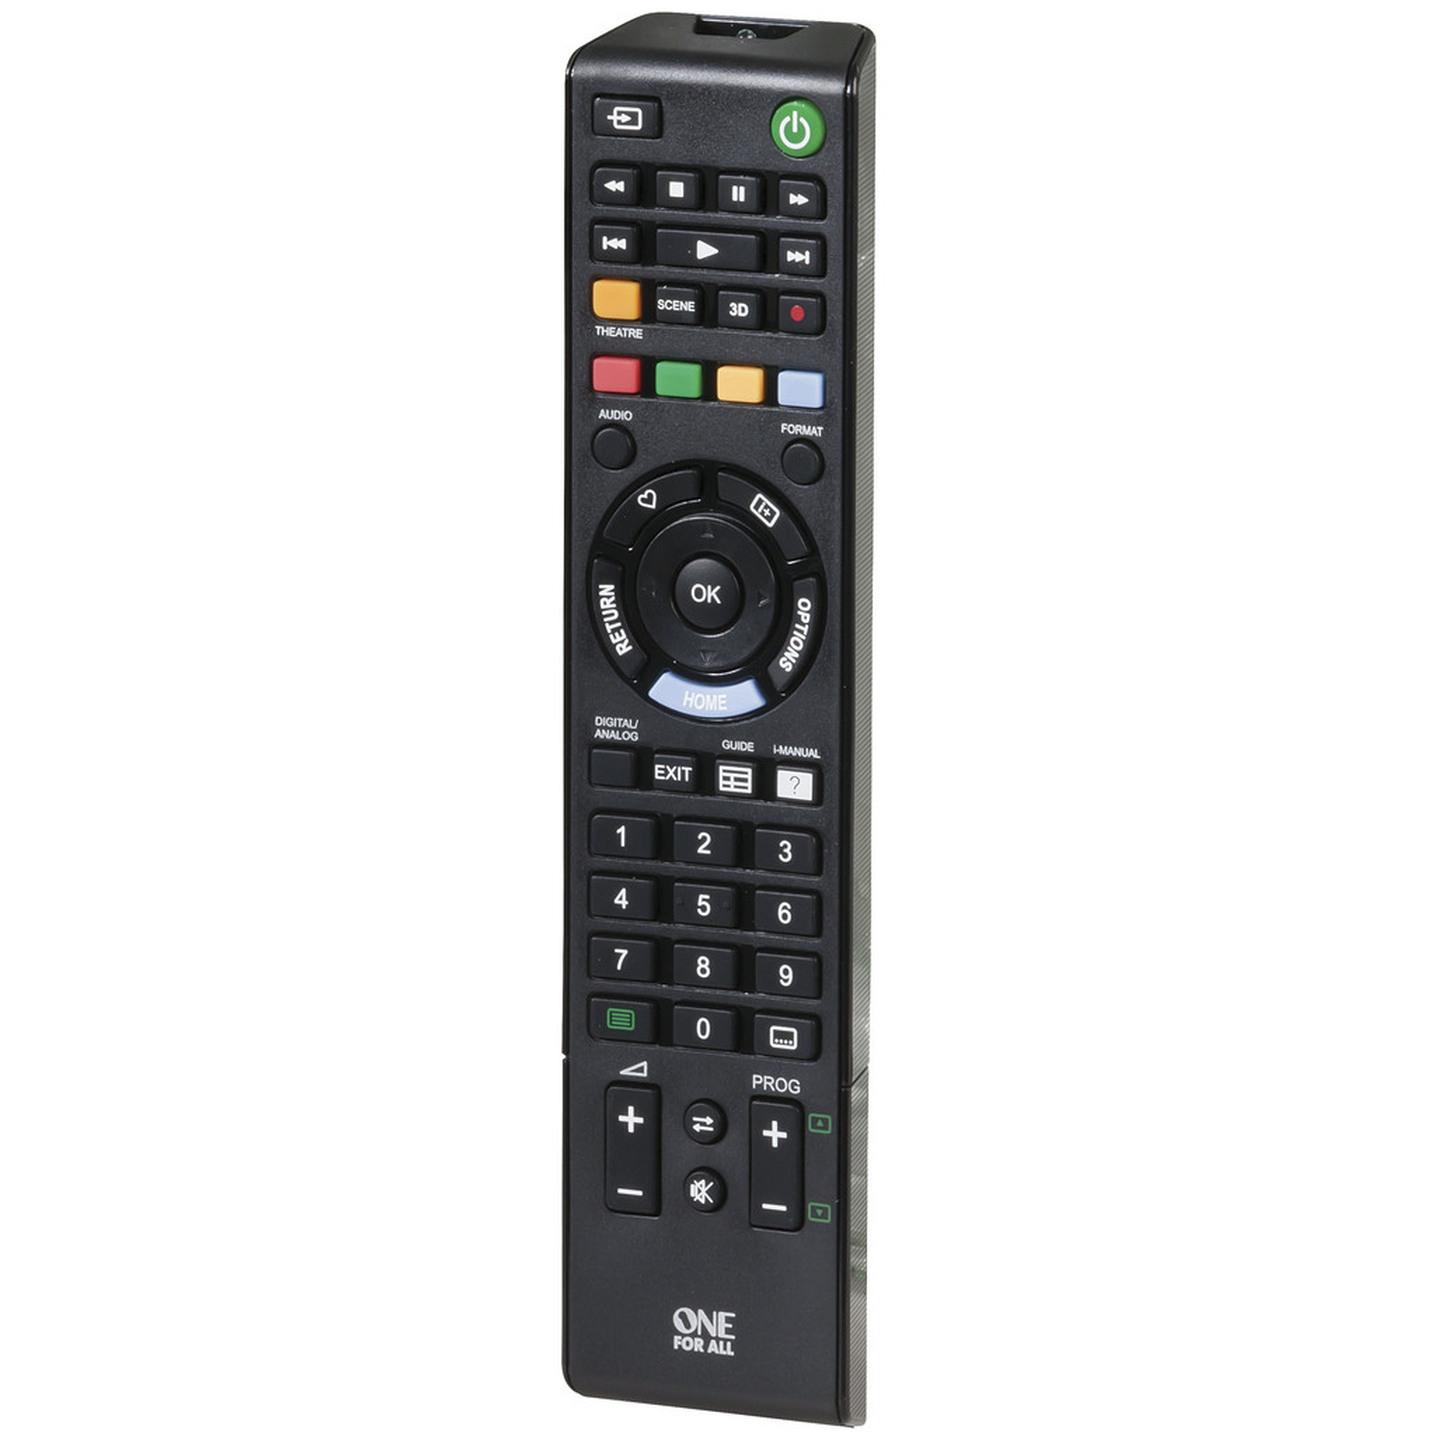 One for all Remote to Suit Sony TV